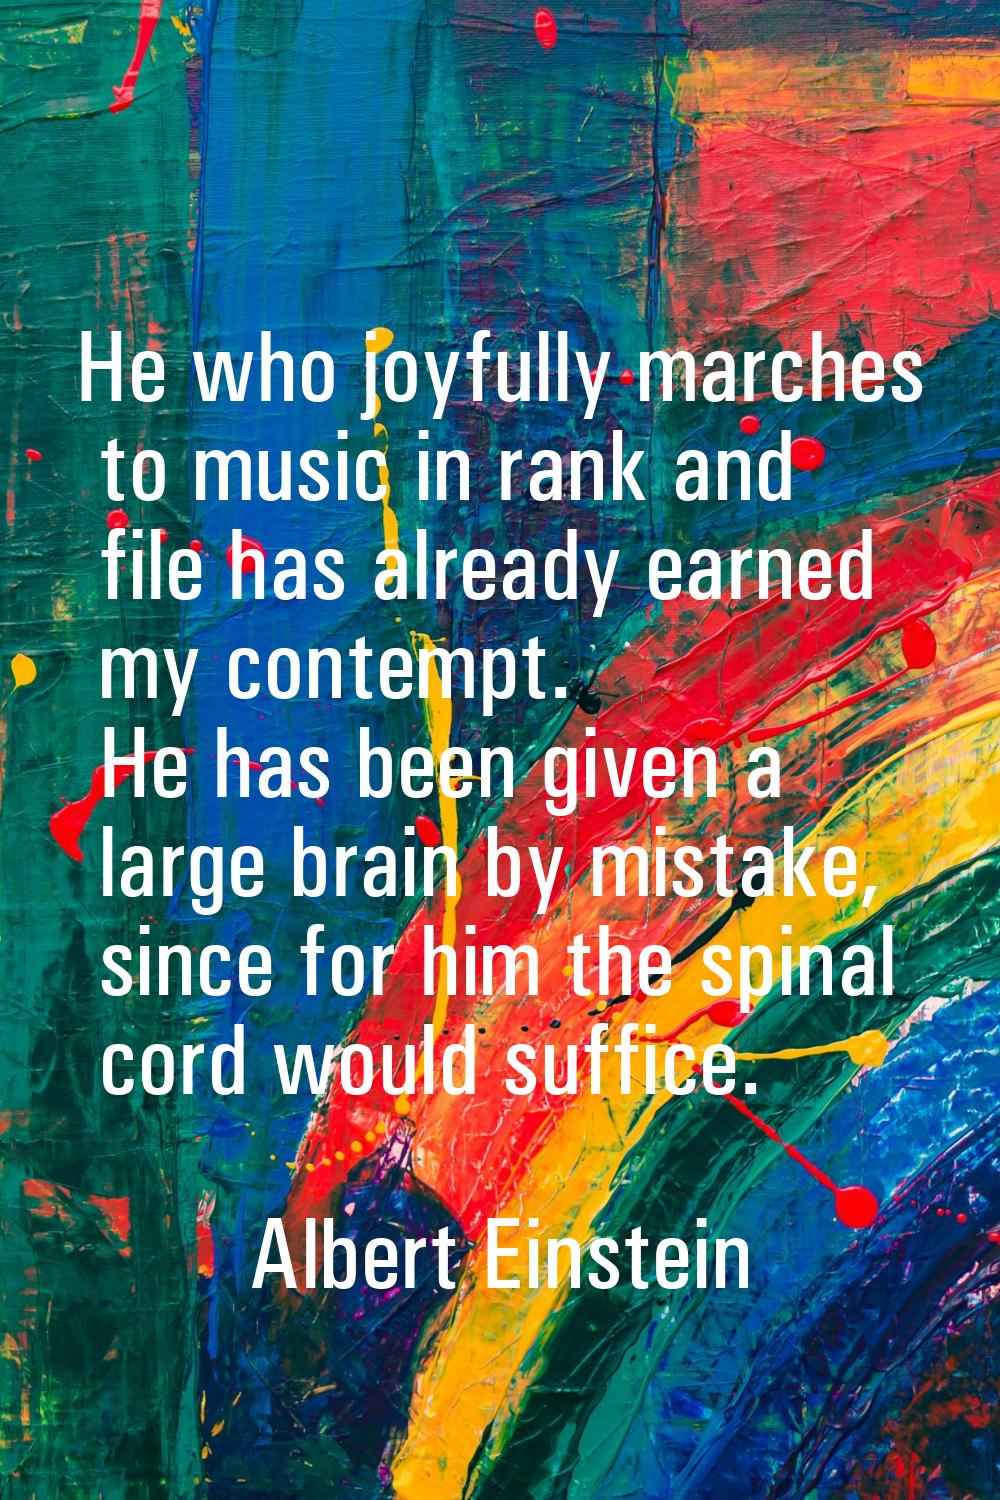 He who joyfully marches to music in rank and file has already earned my contempt. He has been given